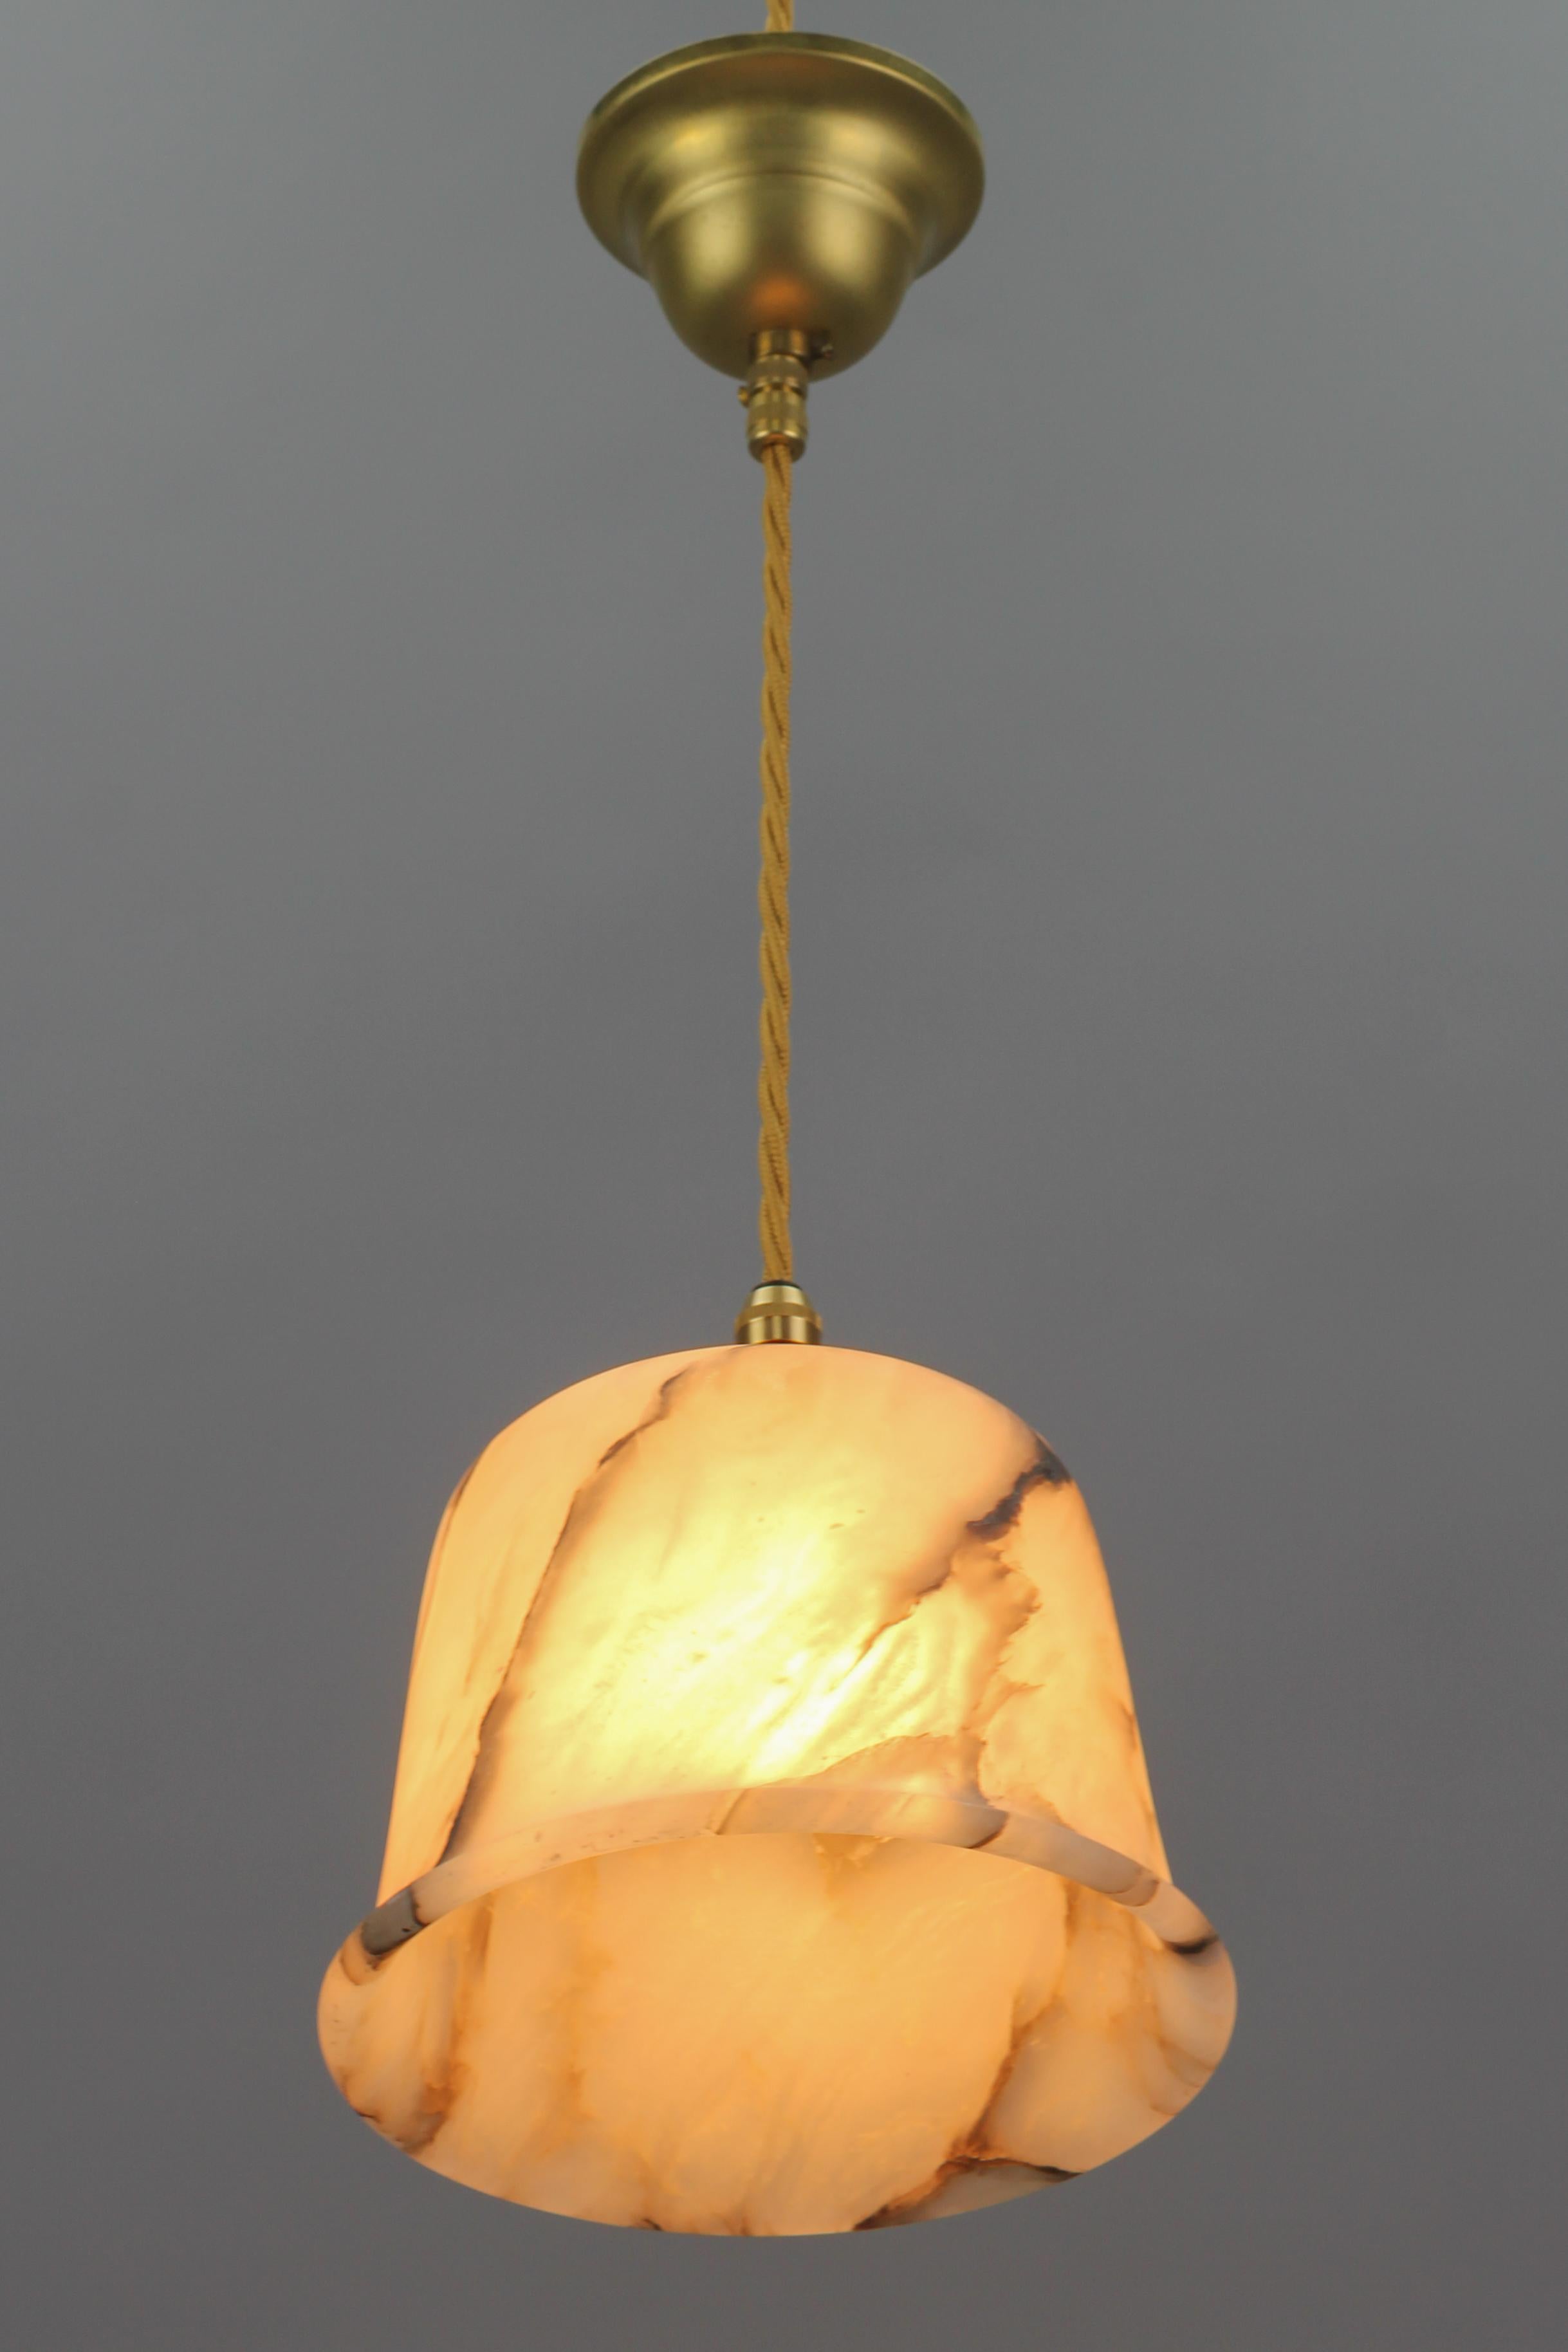 European White and Black Alabaster and Brass Pendant Light Fixture